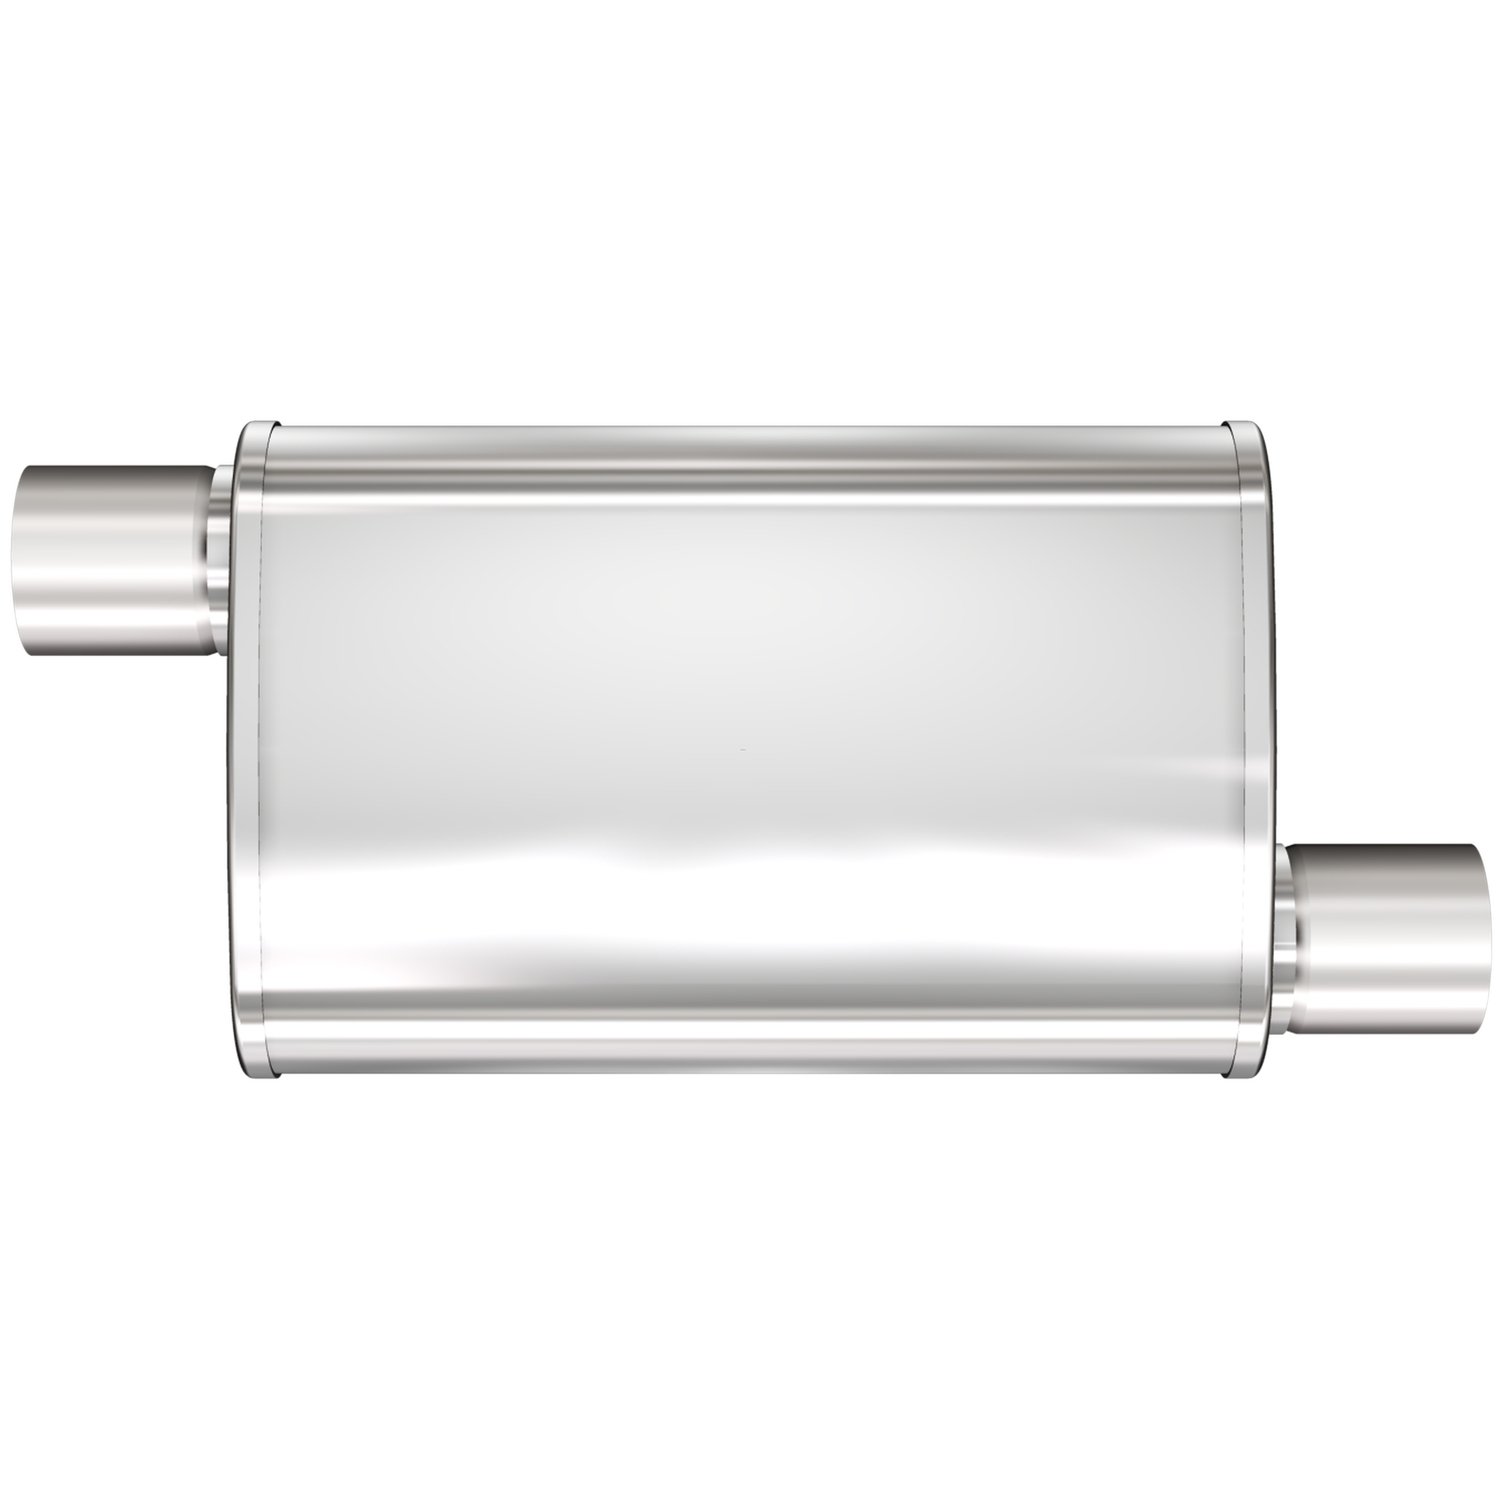 4" x 9" Oval XL 3-Chamber Muffler Offset In/Offset Out: 2"/2" Body Length: 18" Overall Length: 24" Satin Finish